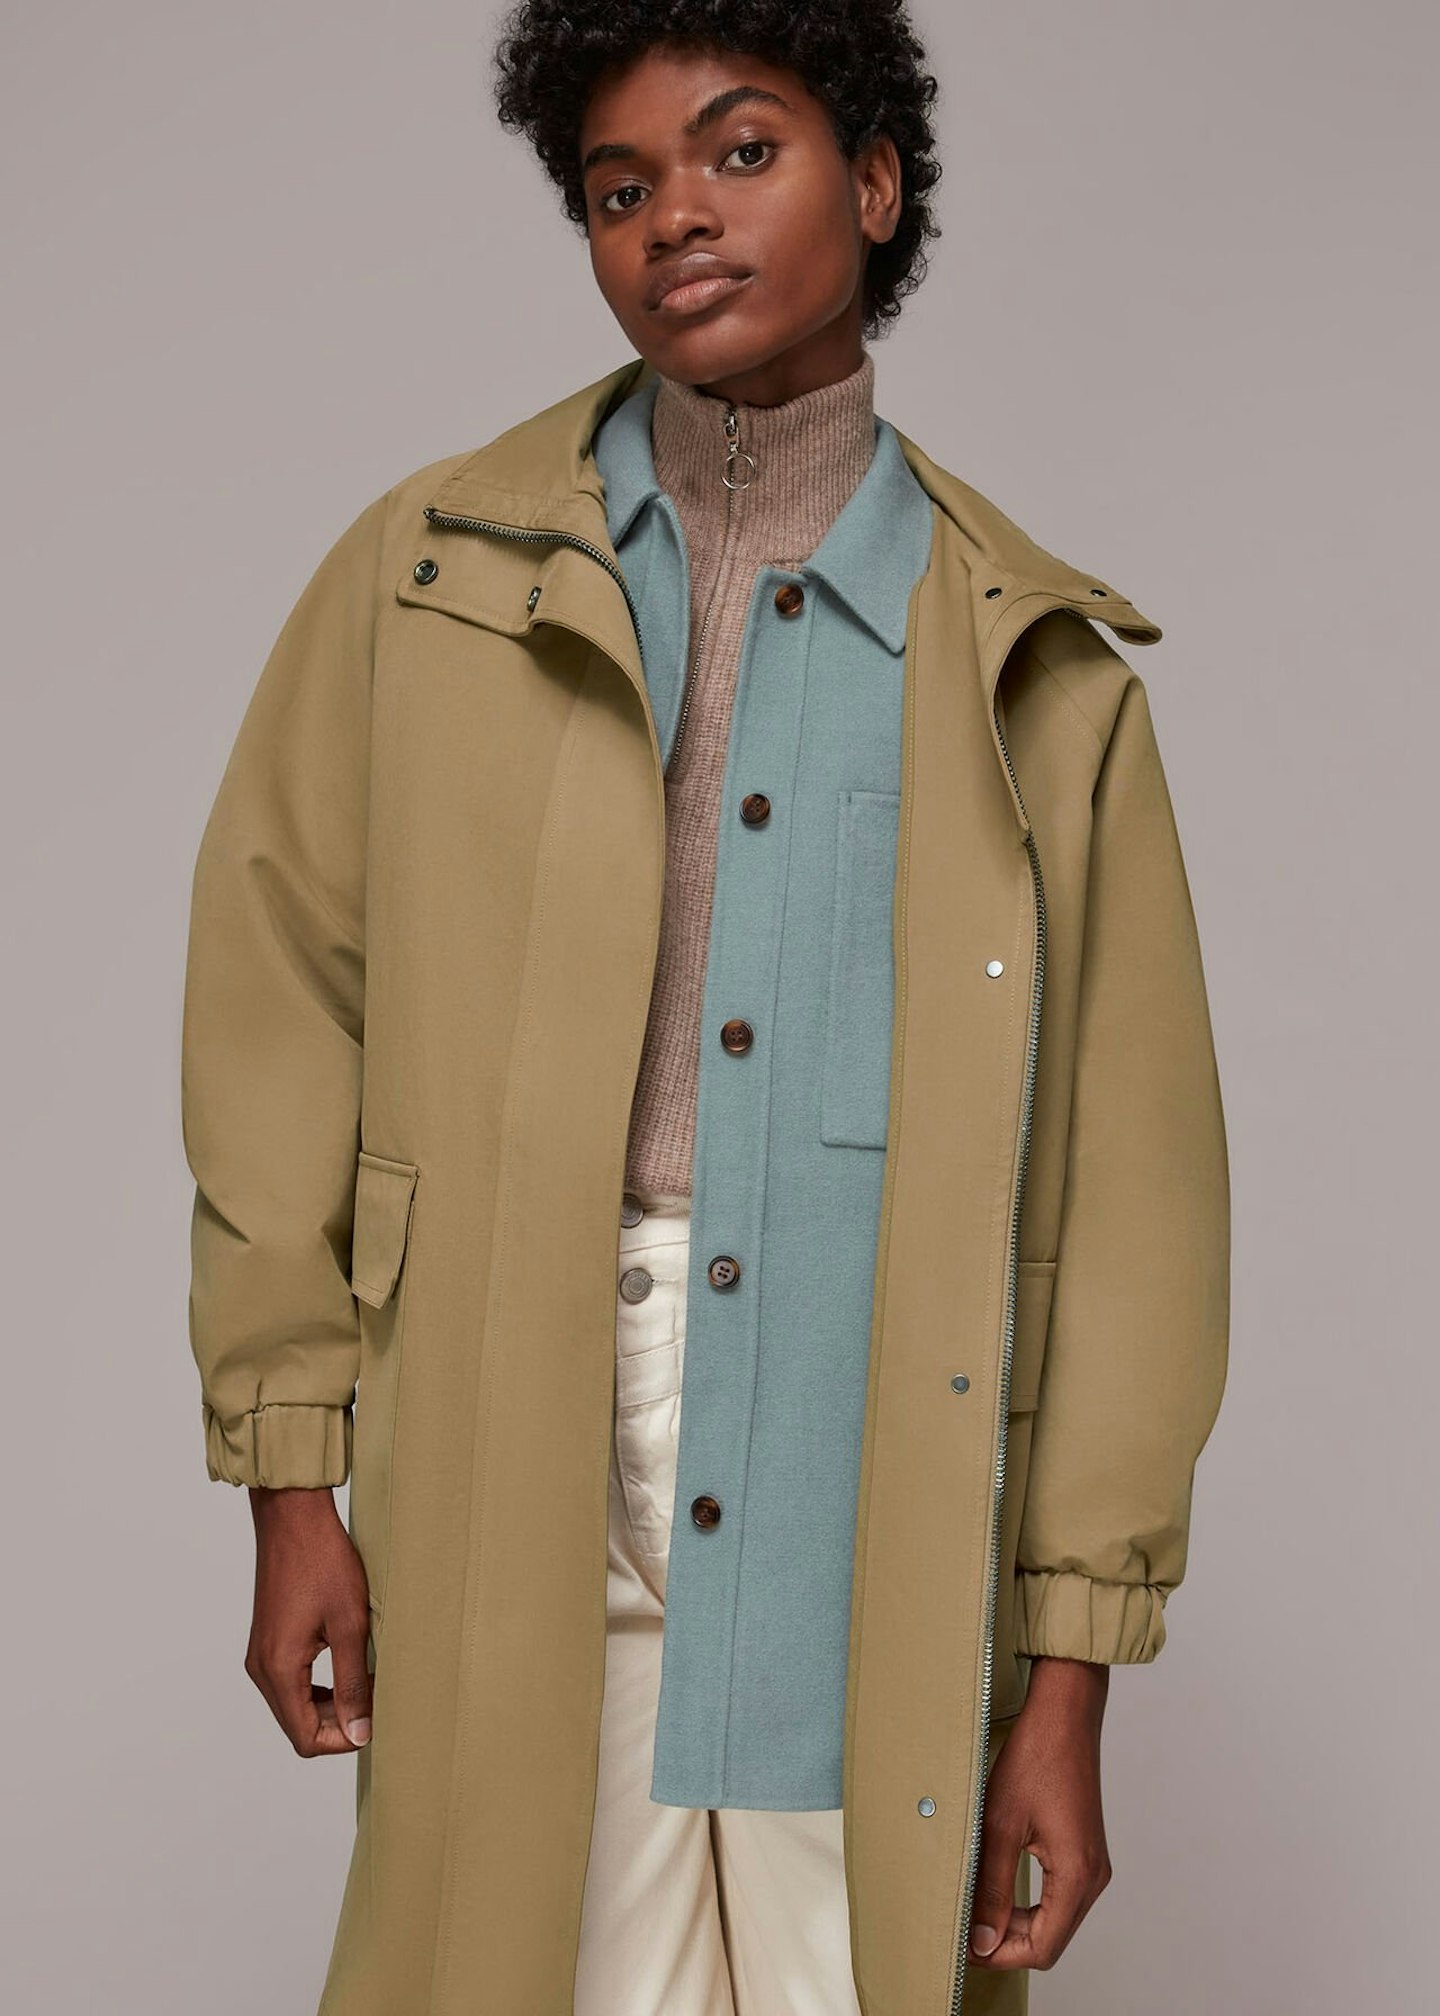 Whistles, Thea Water-Resistant Coat, £149